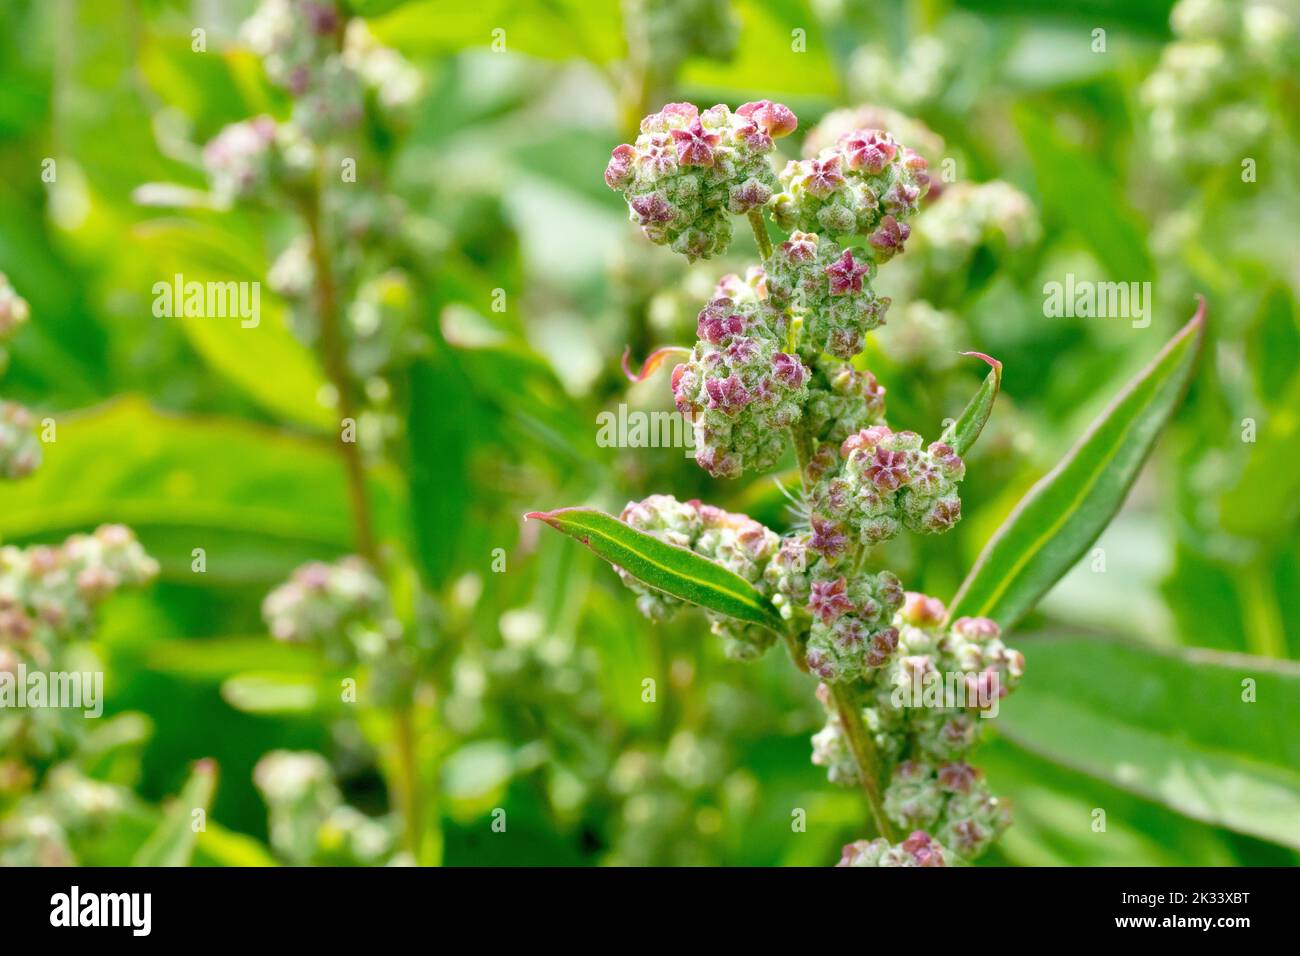 Fat Hen (chenopodium album), close up showing the tiny flowers of the widespread plant of waste places and farmland margins. Stock Photo